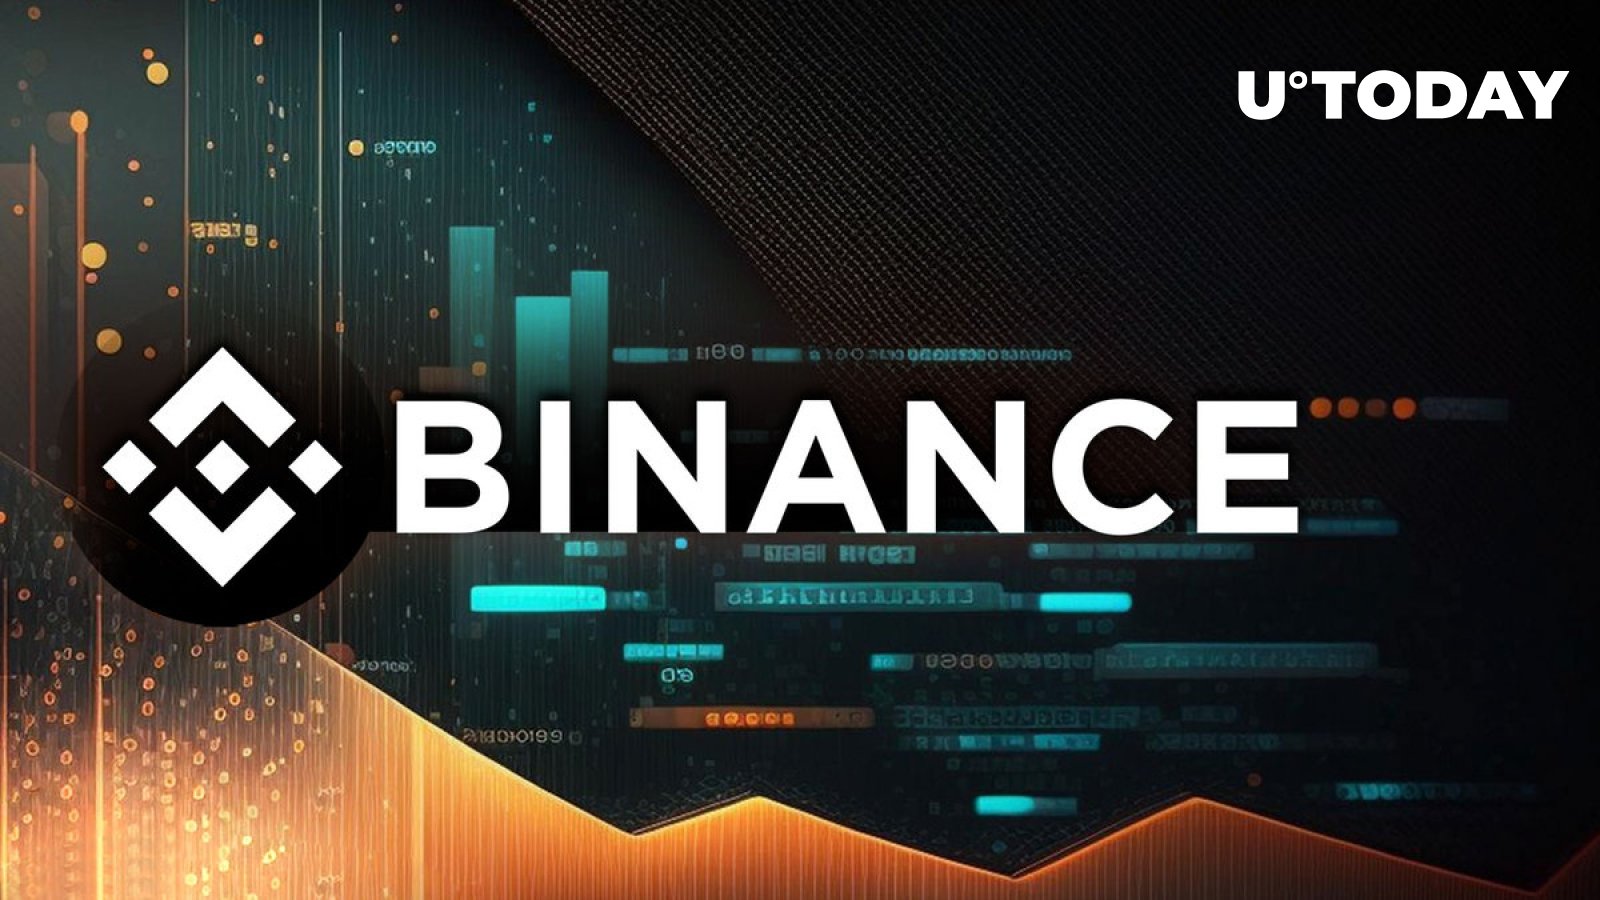 binance-to-delist-6-large-trading-pairs-details